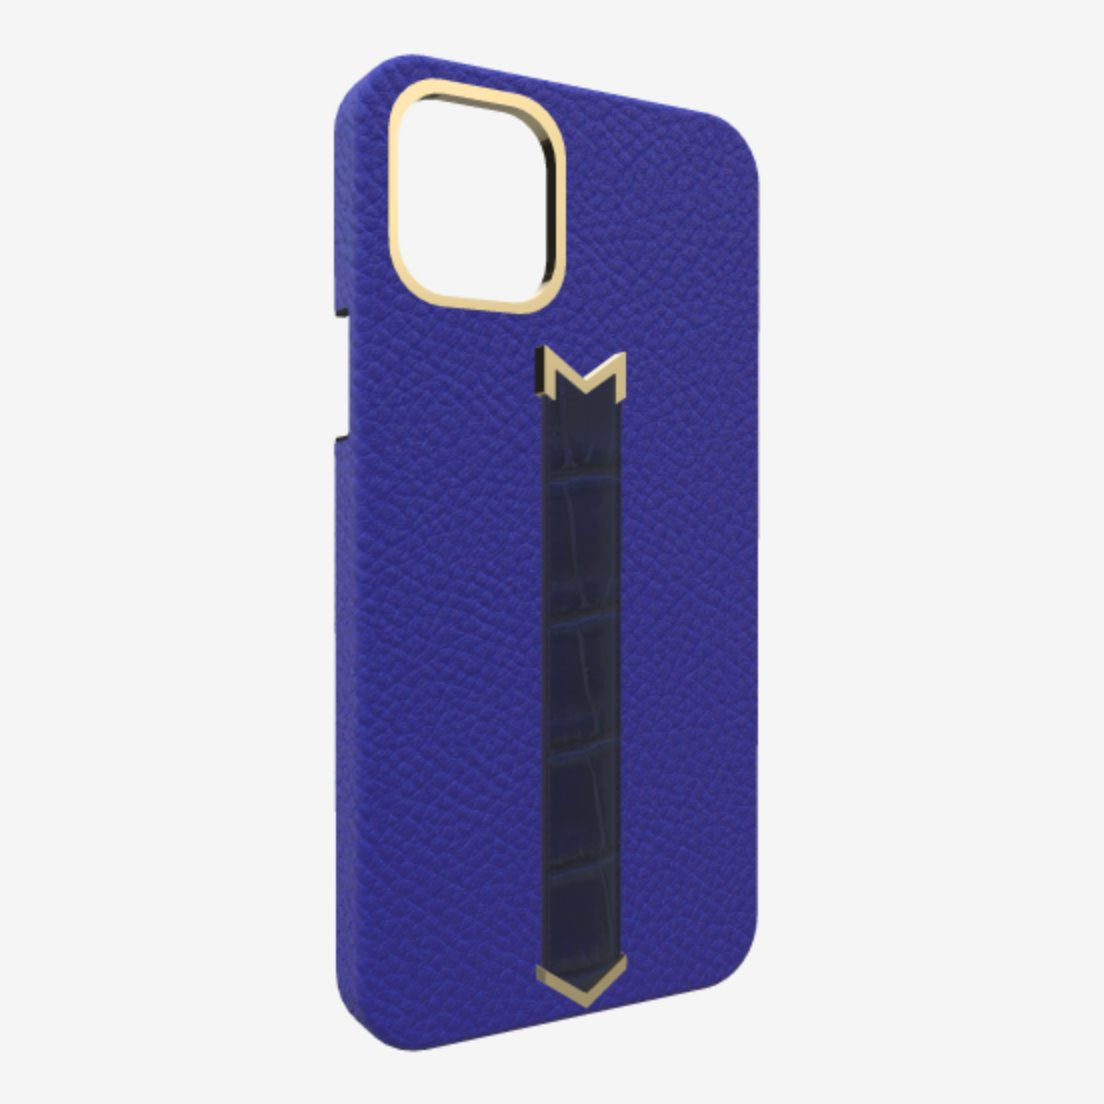 Gold Finger Strap Case for iPhone 13 in Genuine Calfskin and Alligator Electric Blue Navy Blue 